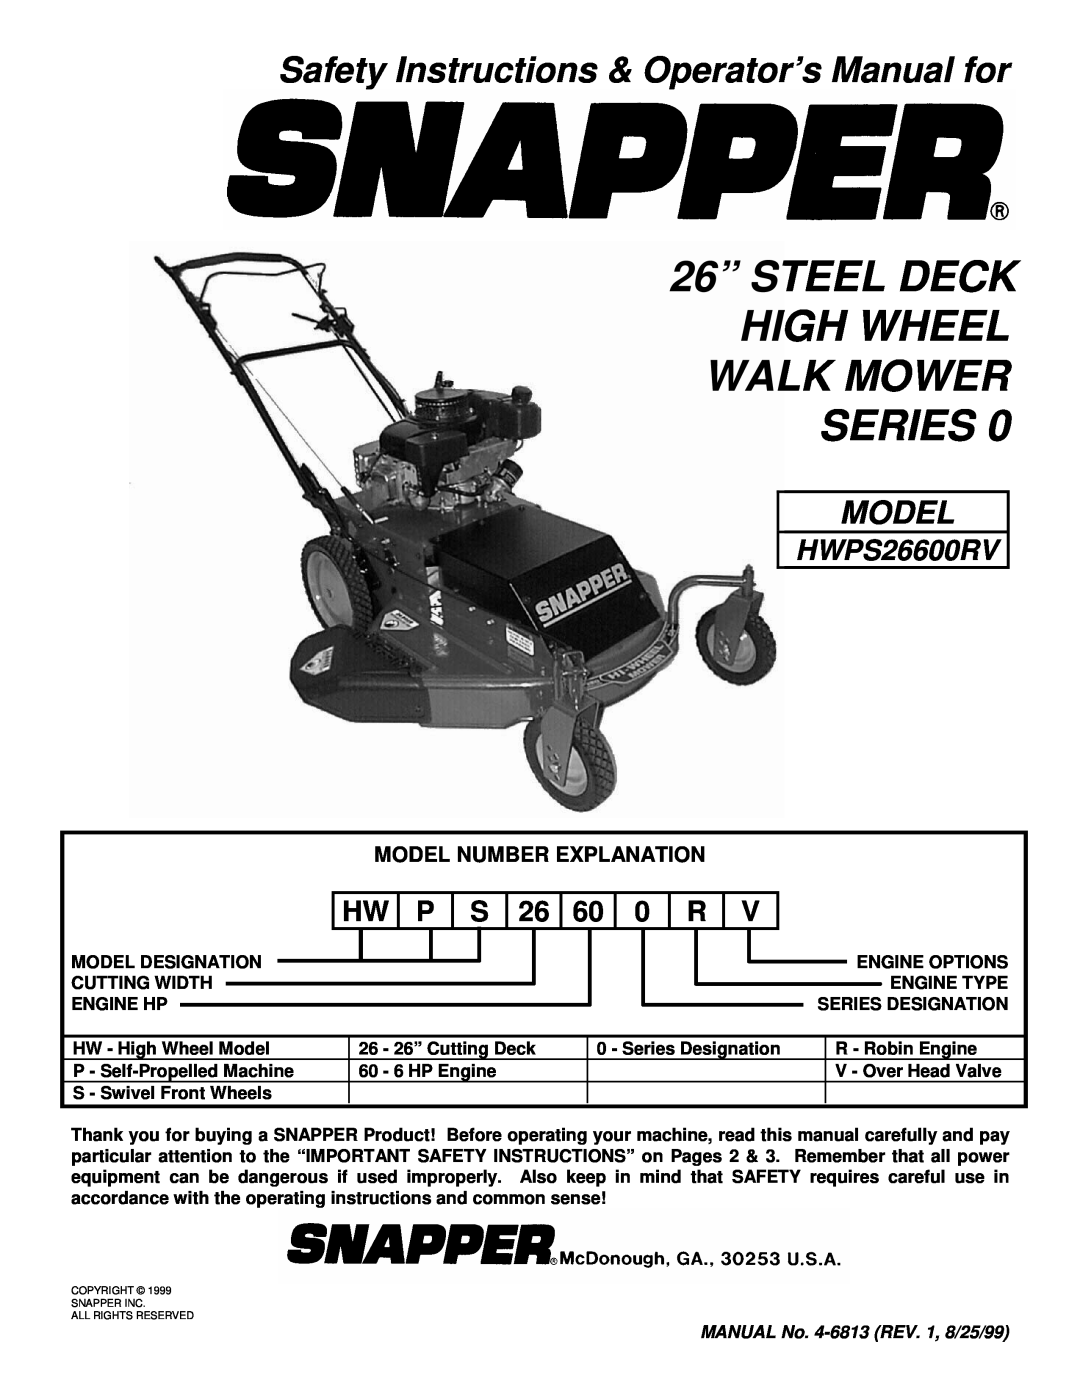 Snapper HWPS26600RV important safety instructions Safety Instructions & Operator’s Manual for, Model 